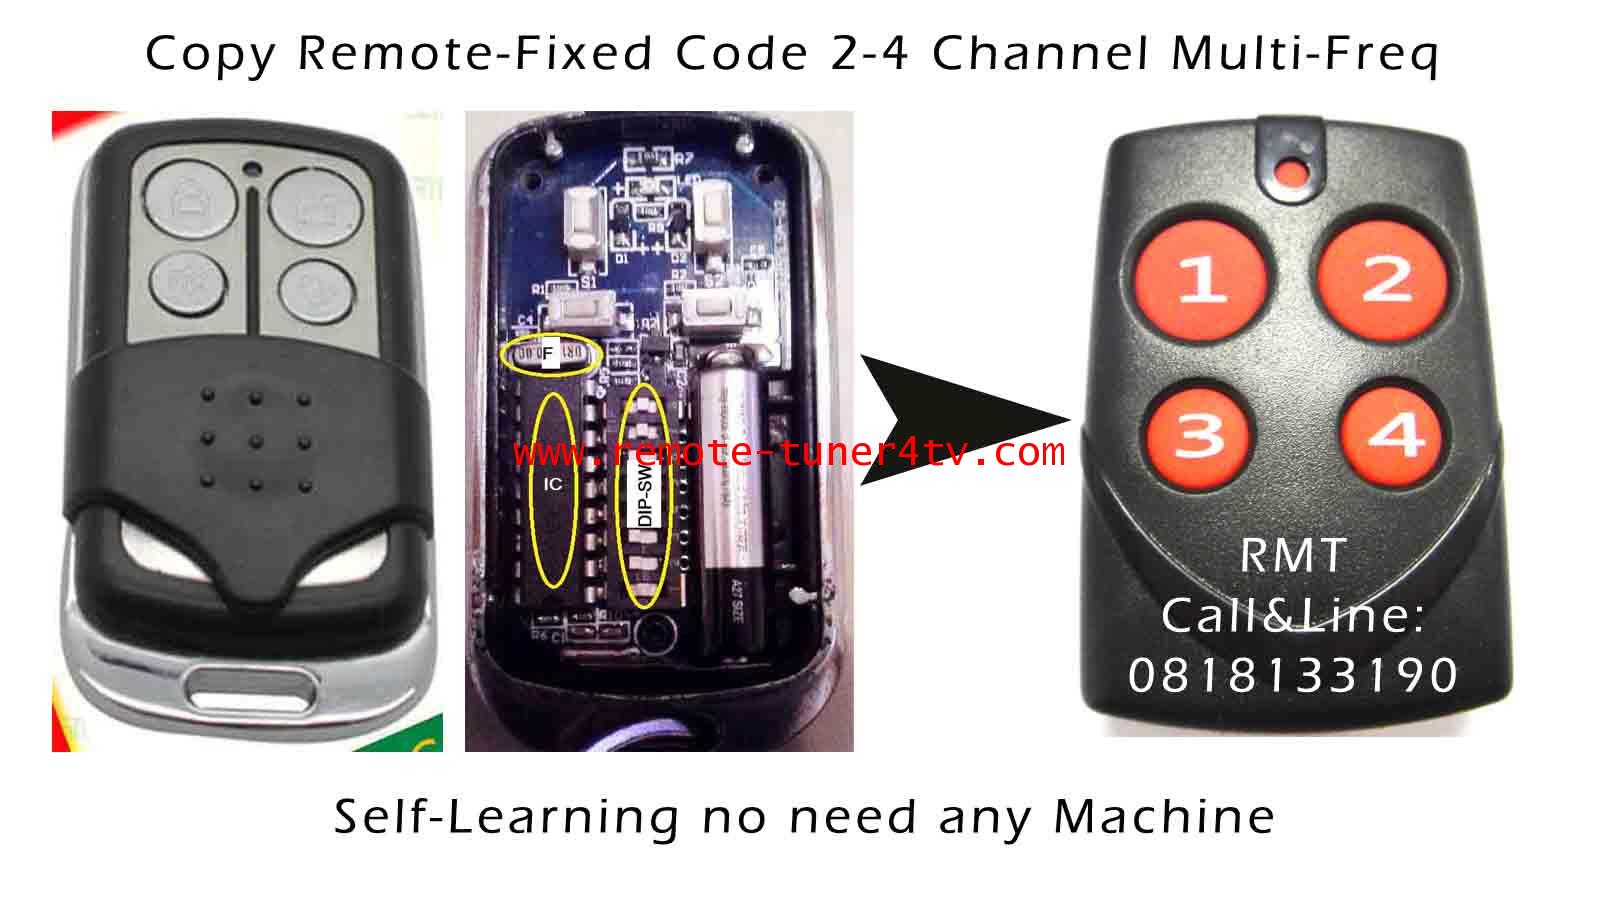 QN-RD166B_REMOTE_FIXED-CODESELF-LEARNING 1 BRAND